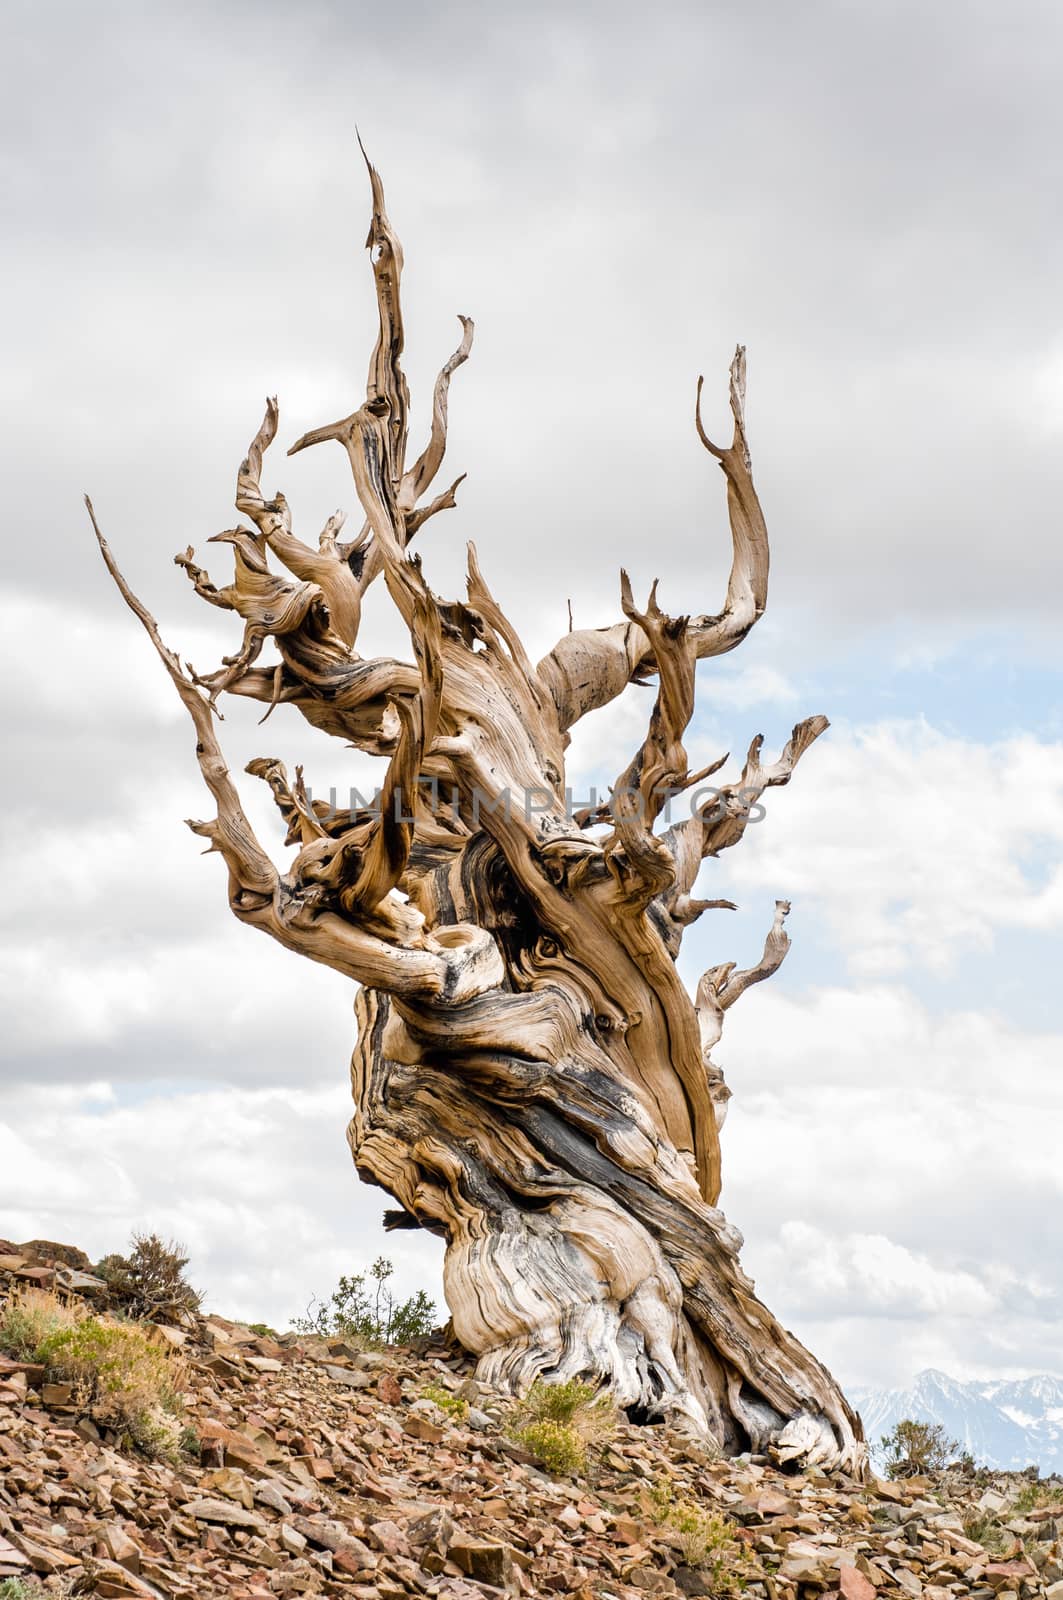 Great Basin Bristlecone Pine (Pinus longaeva) in Ancient Bristlecone Pine Forest in the White Mountains of Inyo County, CA